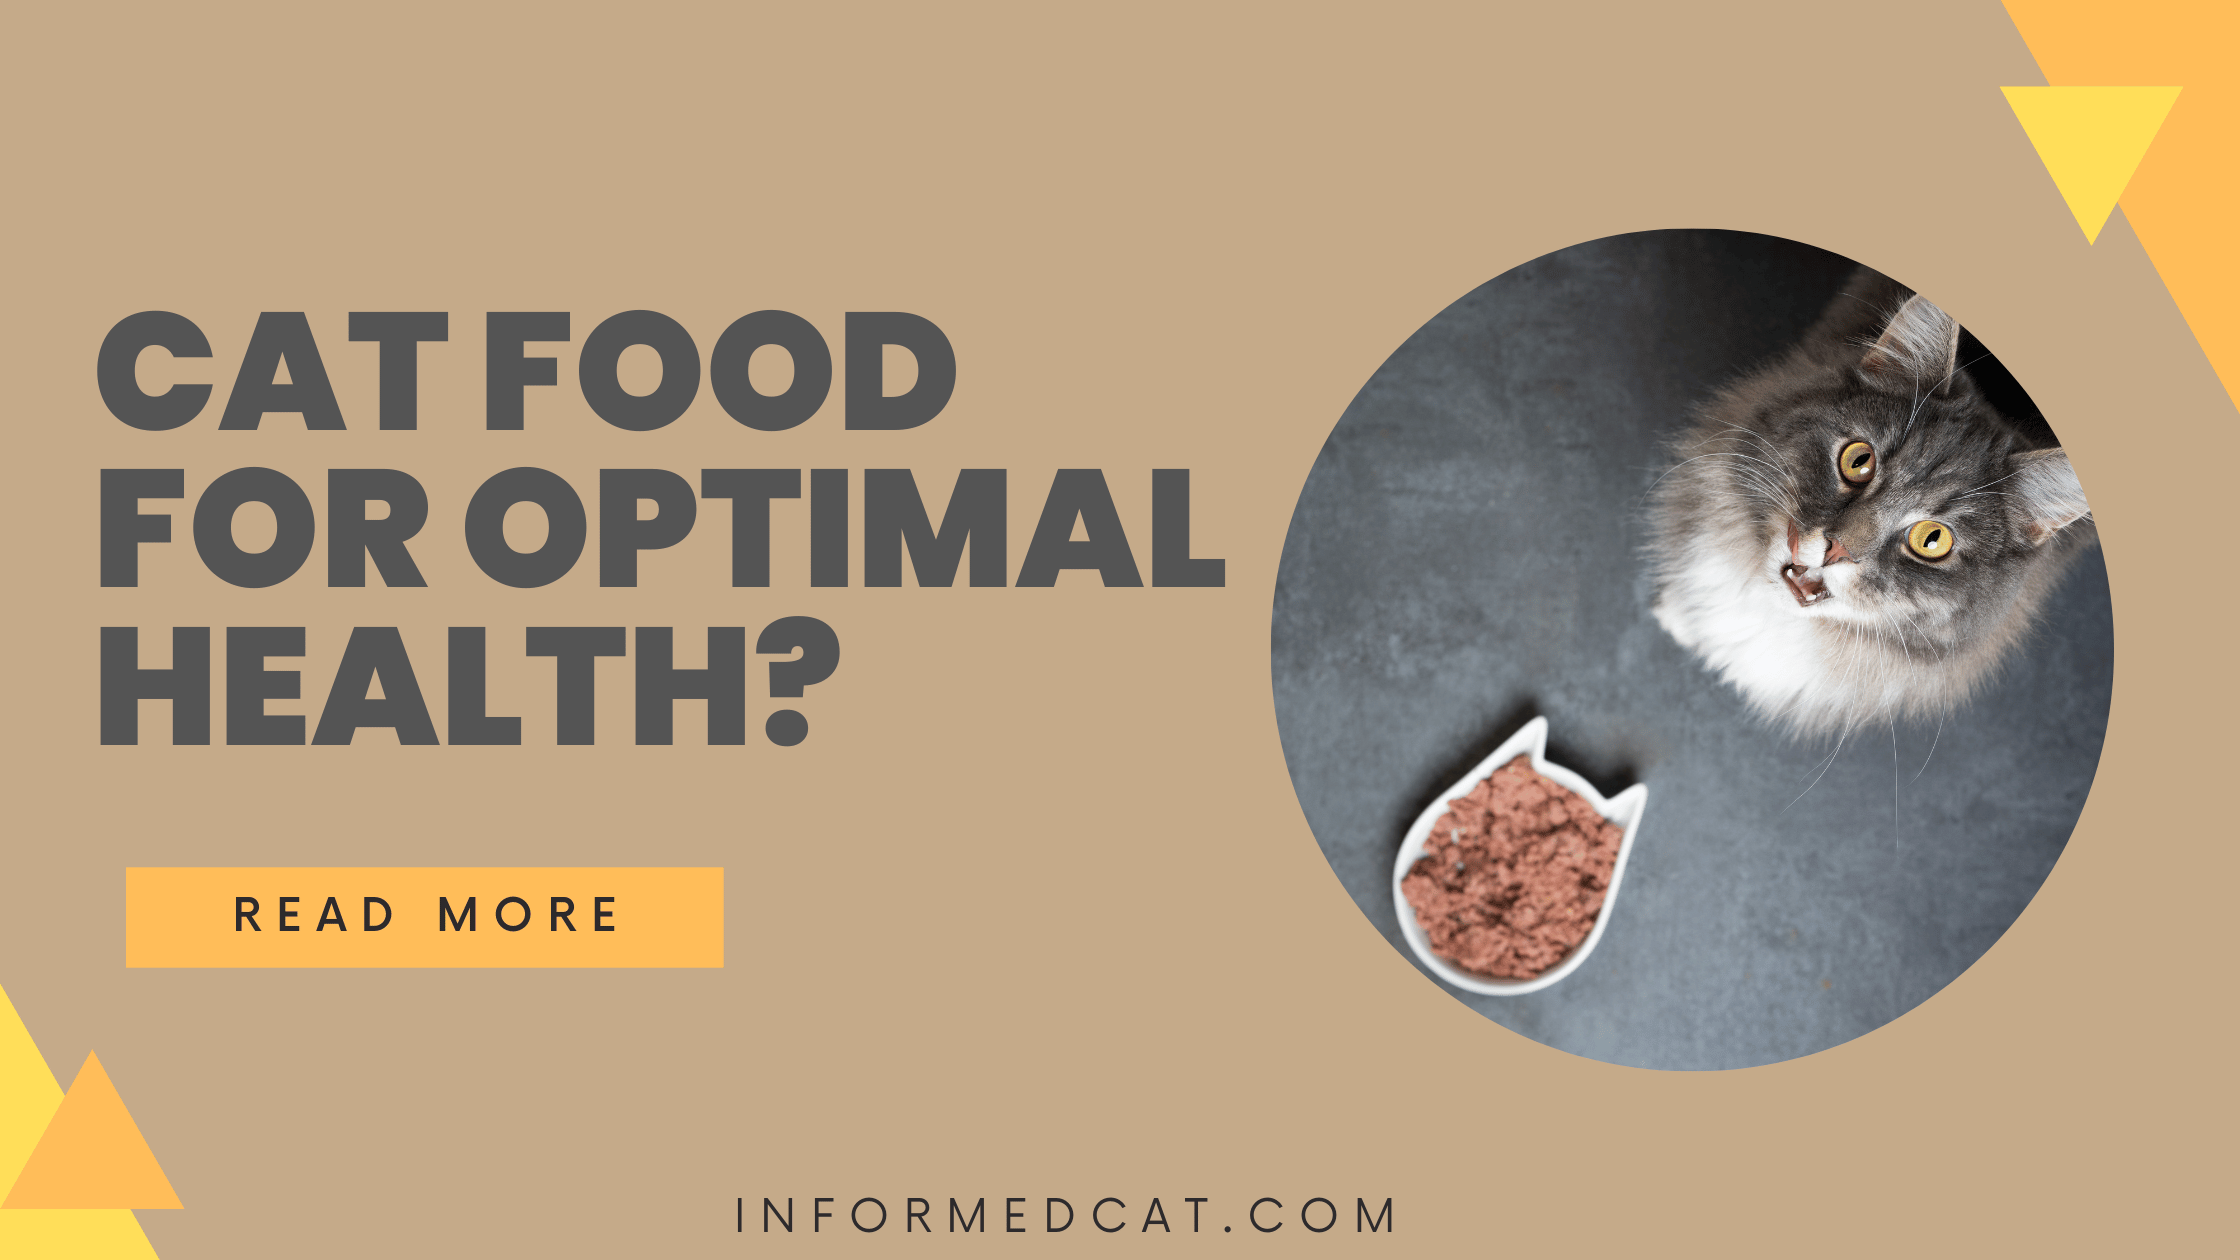 What are the best types of food to feed my cat for optimal health?